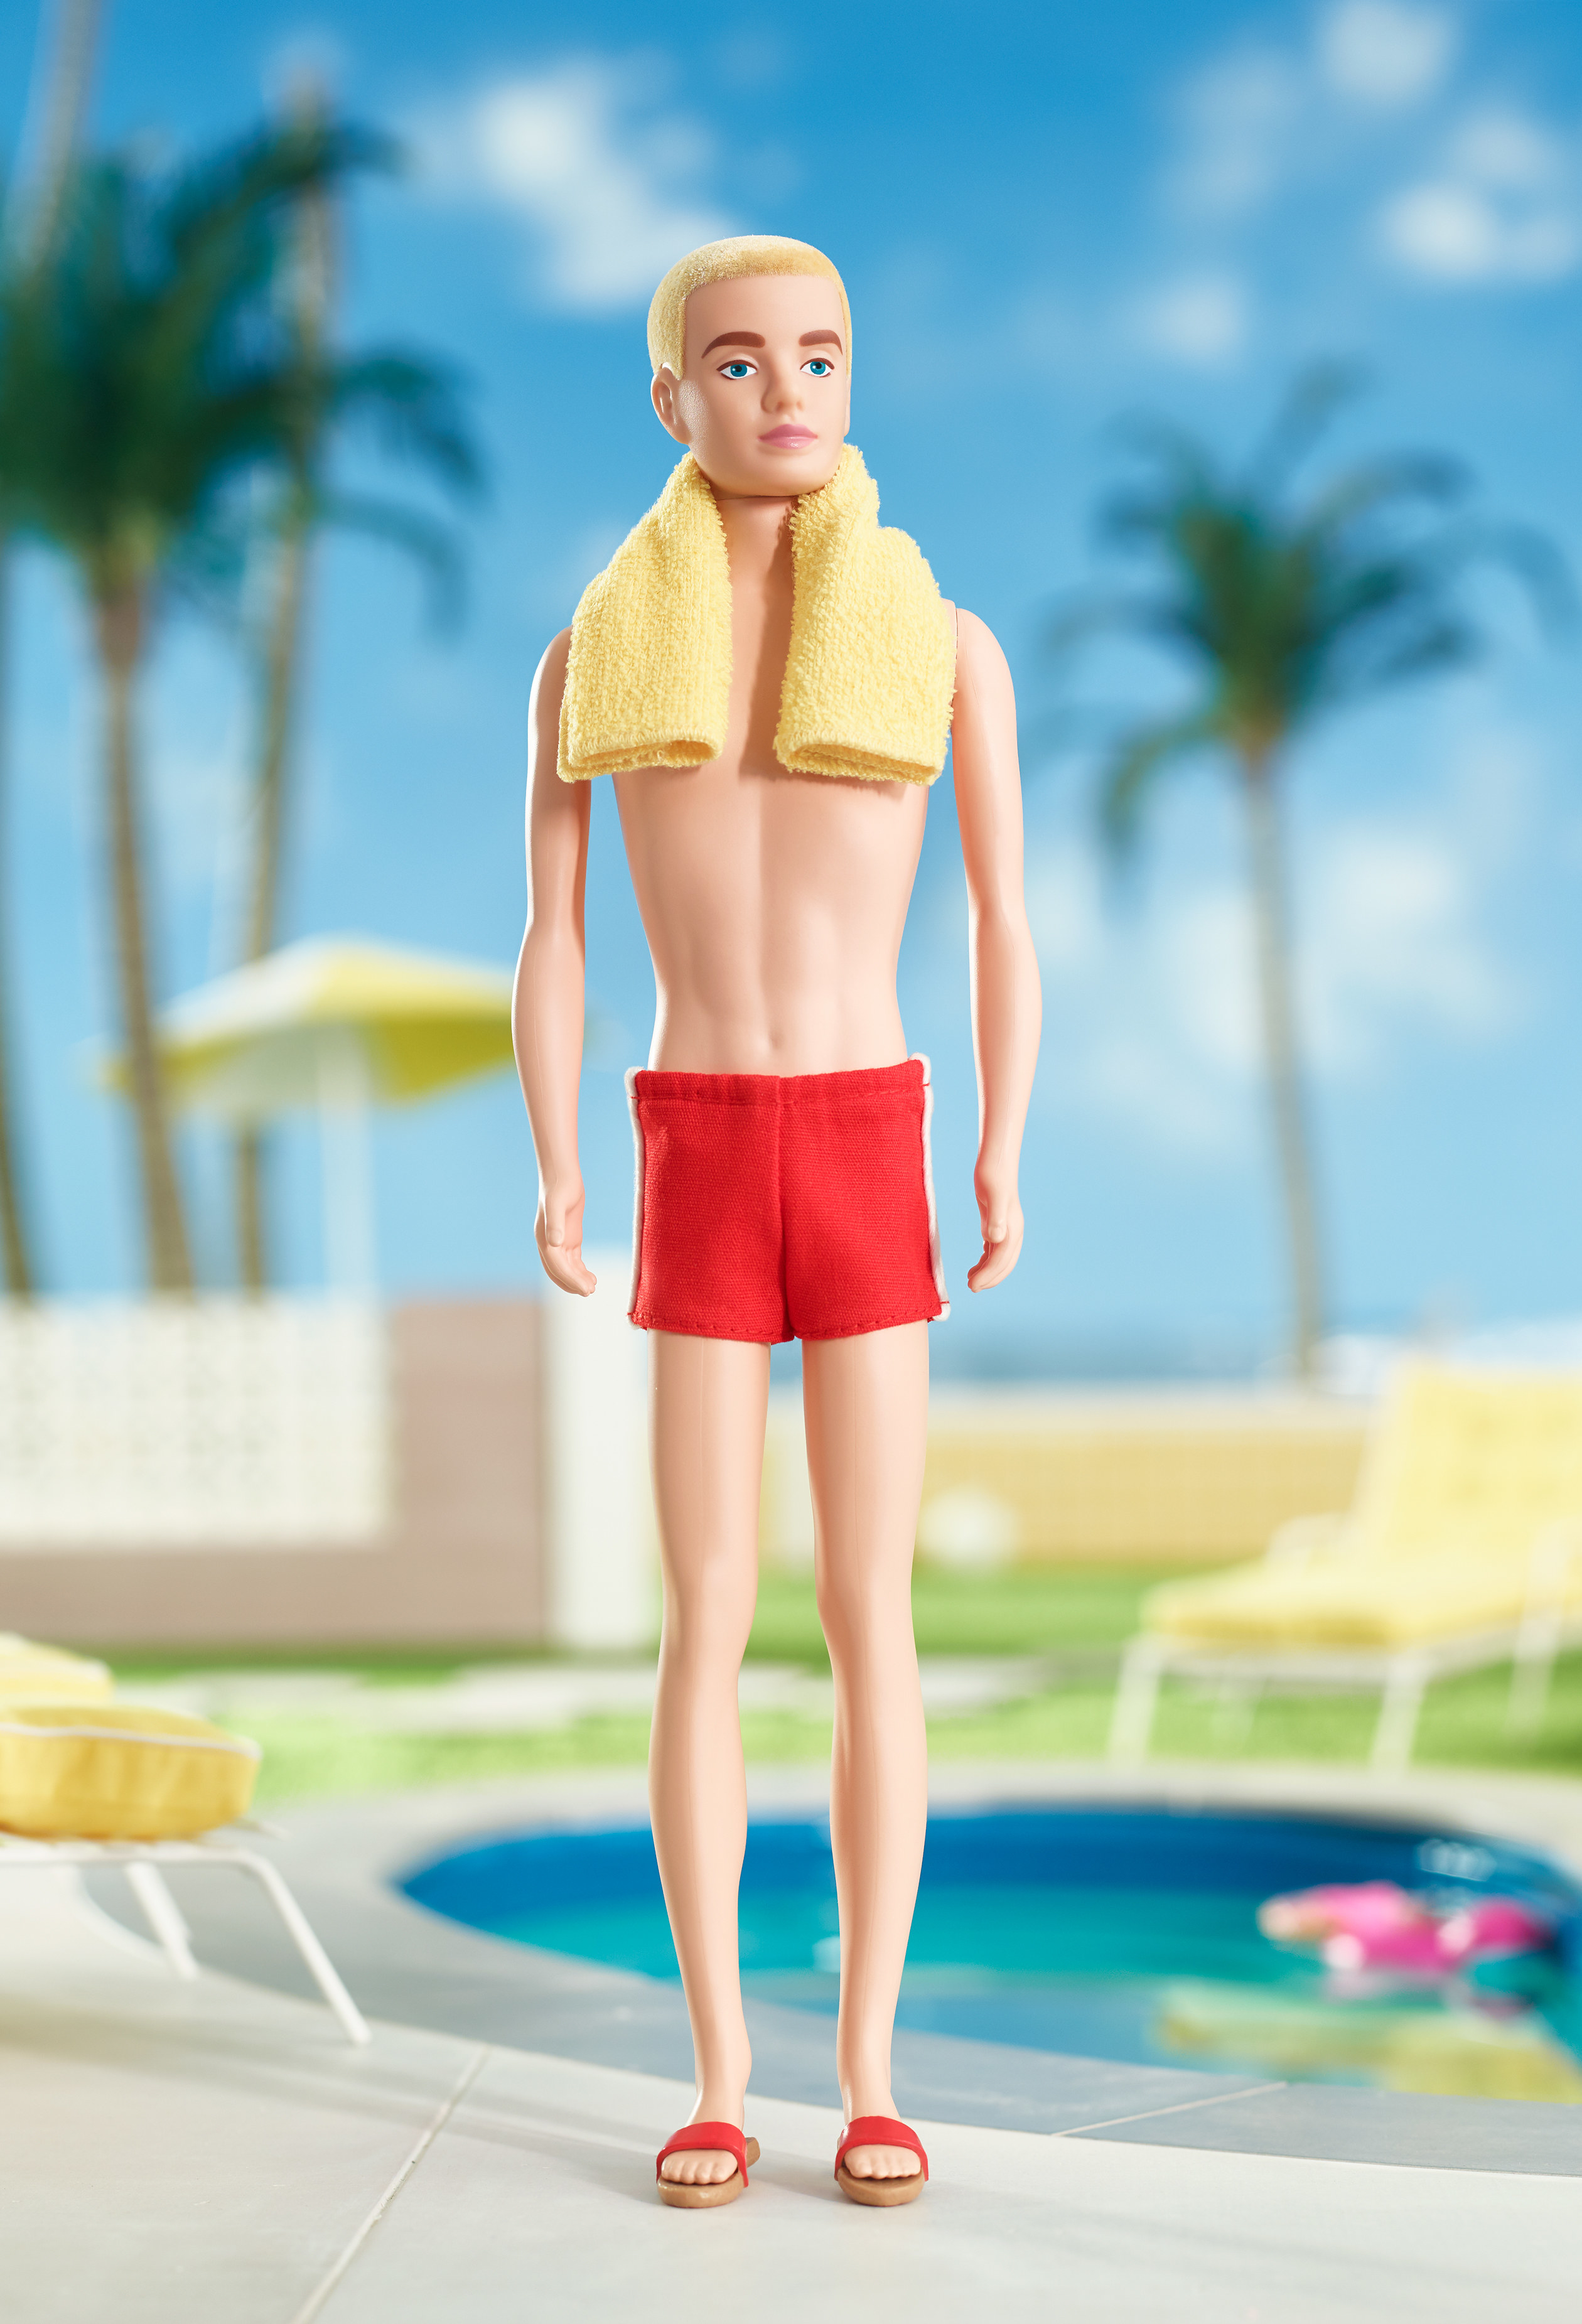 The original Ken doll in a red swim suit and with blonde hair